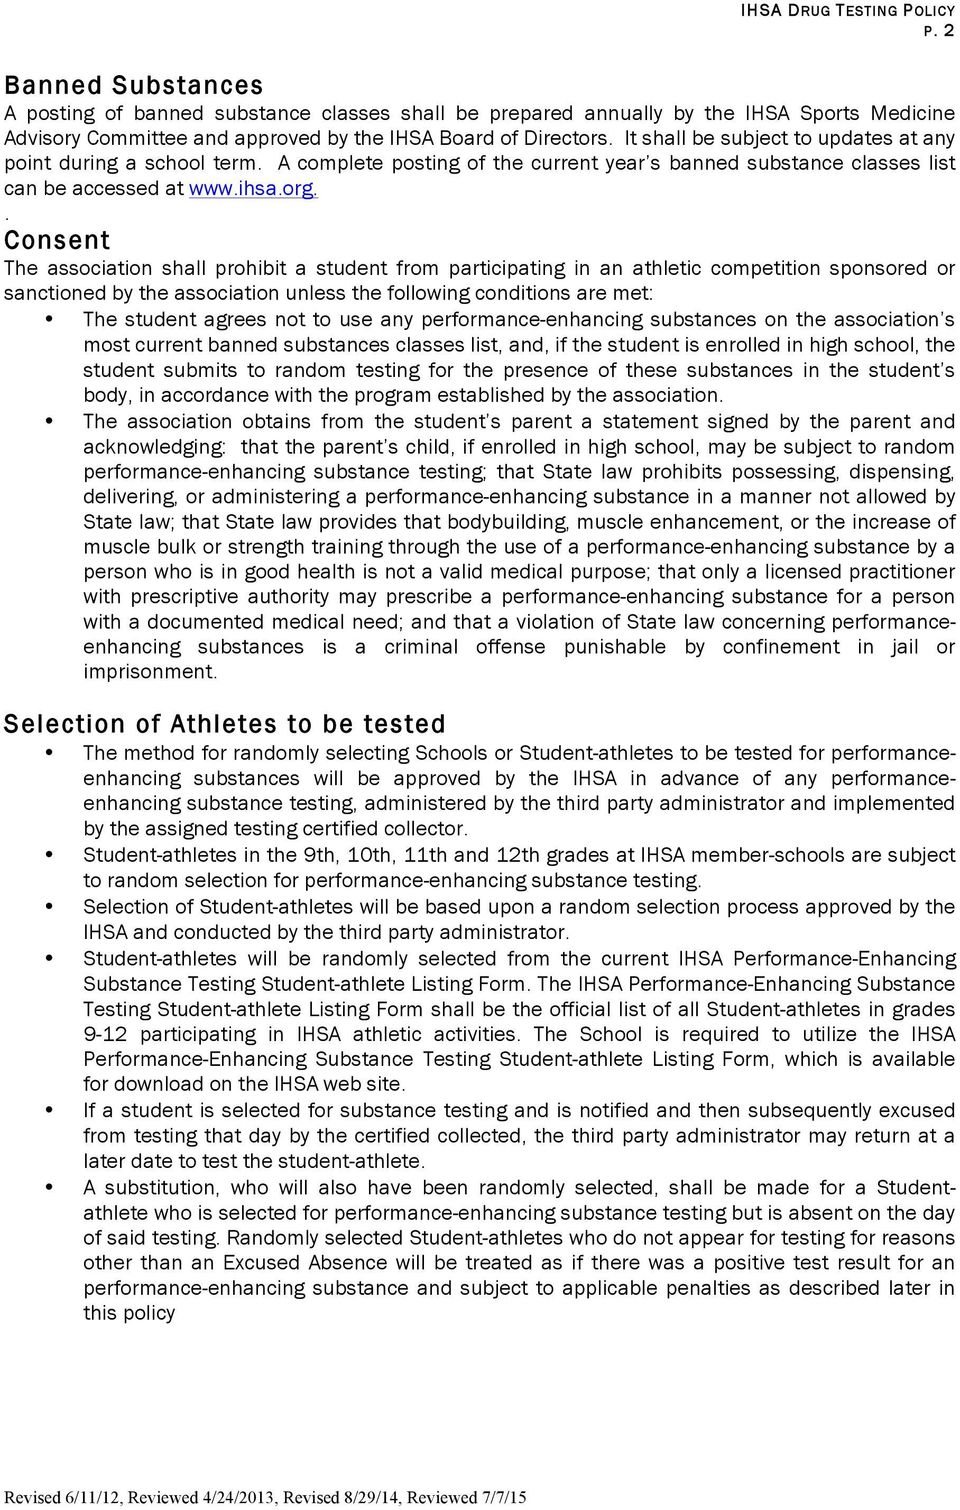 . Consent The association shall prohibit a student from participating in an athletic competition sponsored or sanctioned by the association unless the following conditions are met: The student agrees